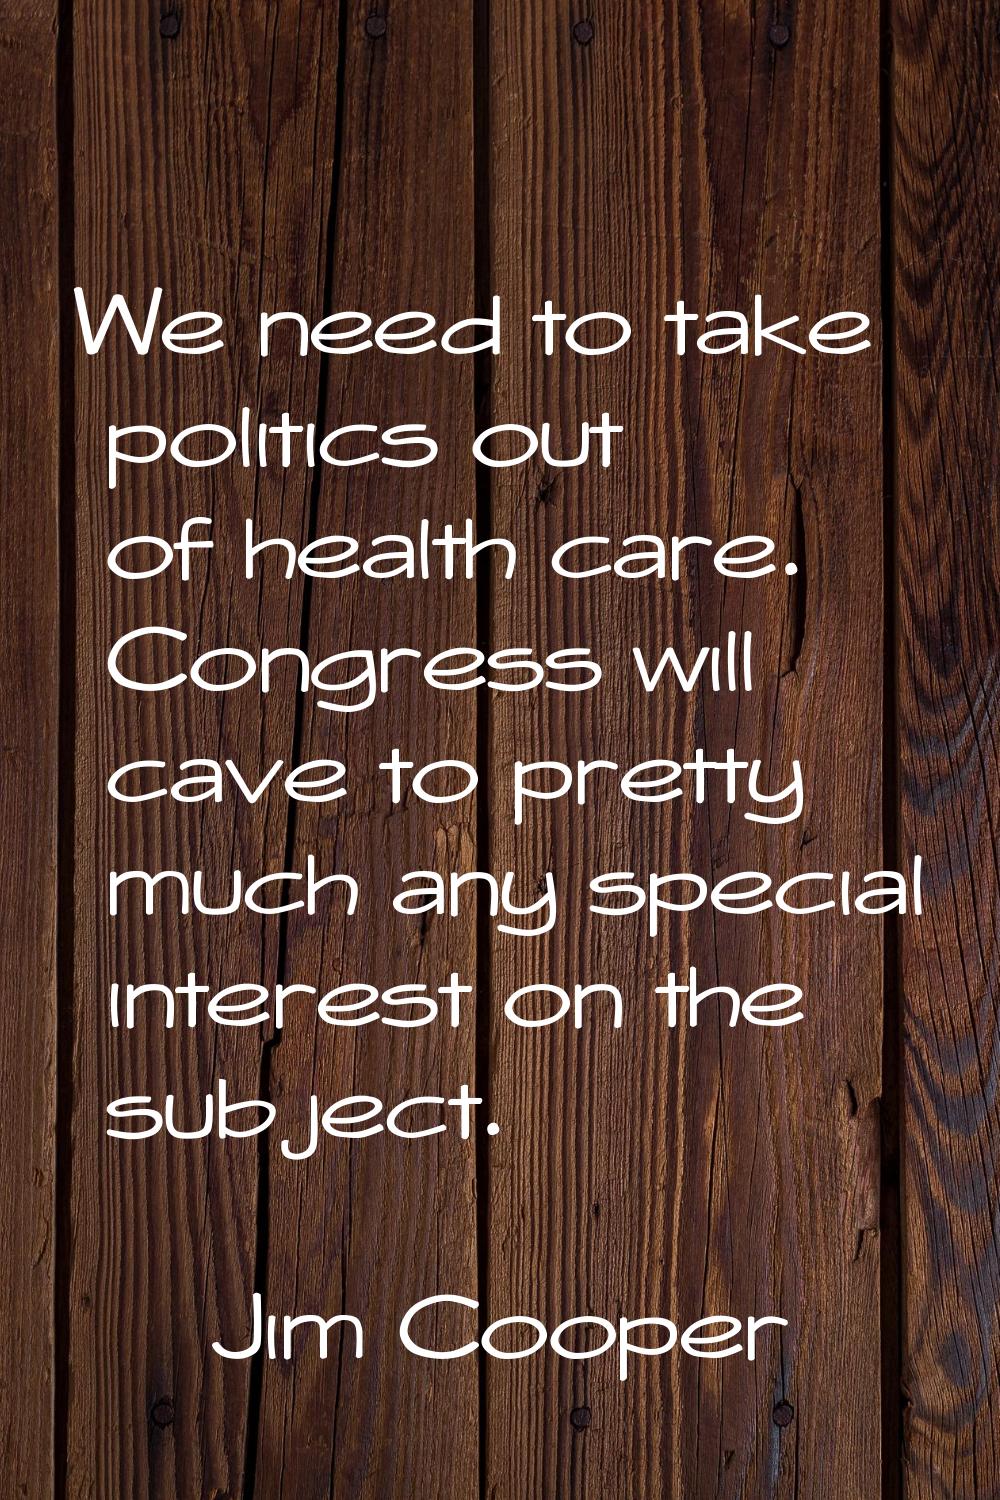 We need to take politics out of health care. Congress will cave to pretty much any special interest